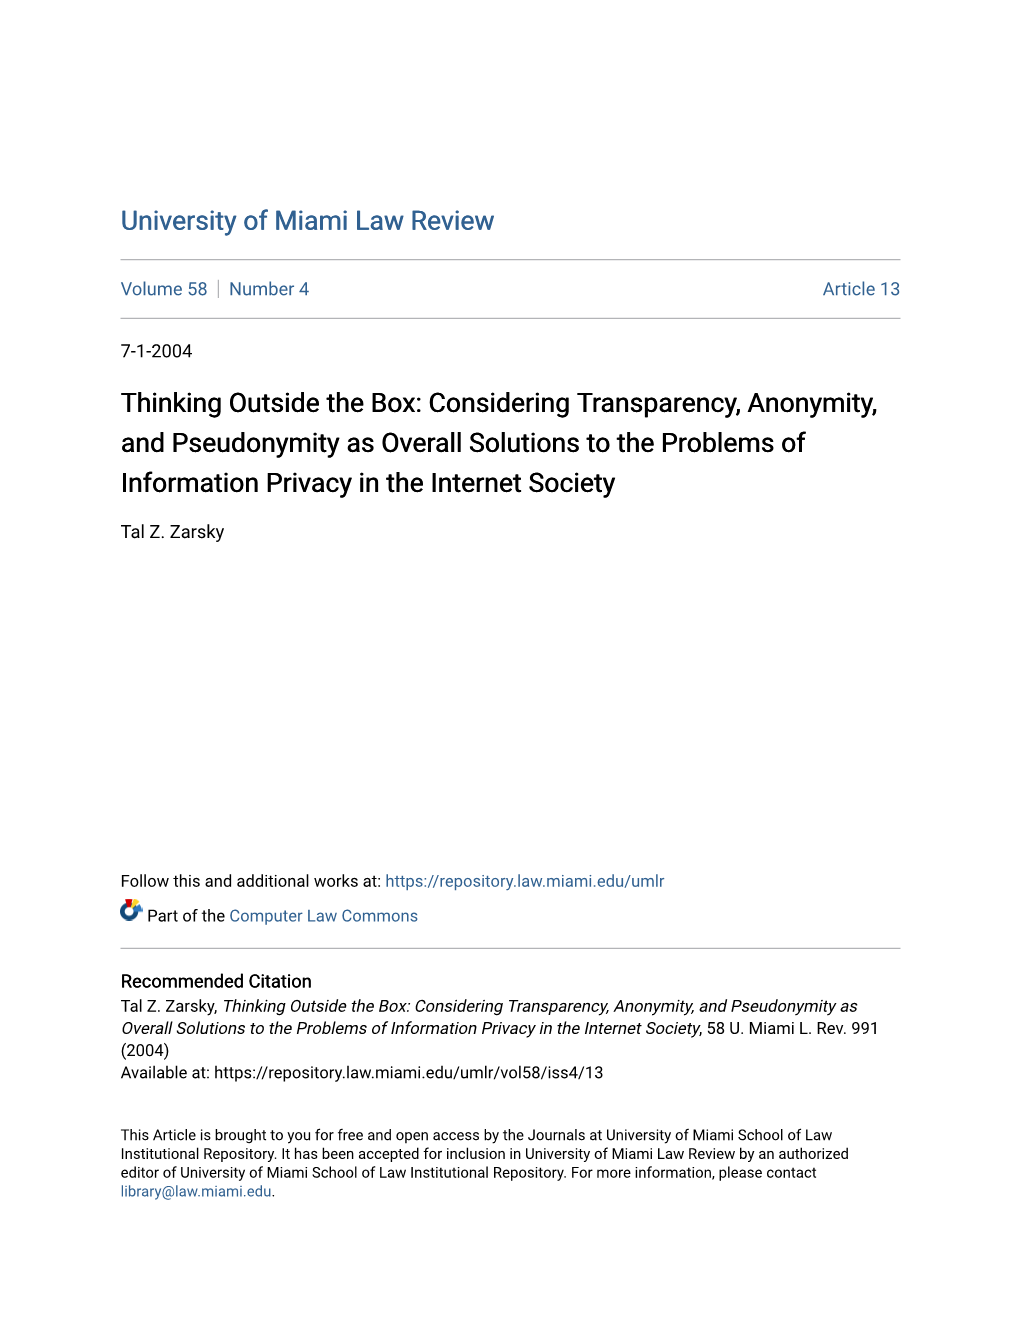 Considering Transparency, Anonymity, and Pseudonymity As Overall Solutions to the Problems of Information Privacy in the Internet Society